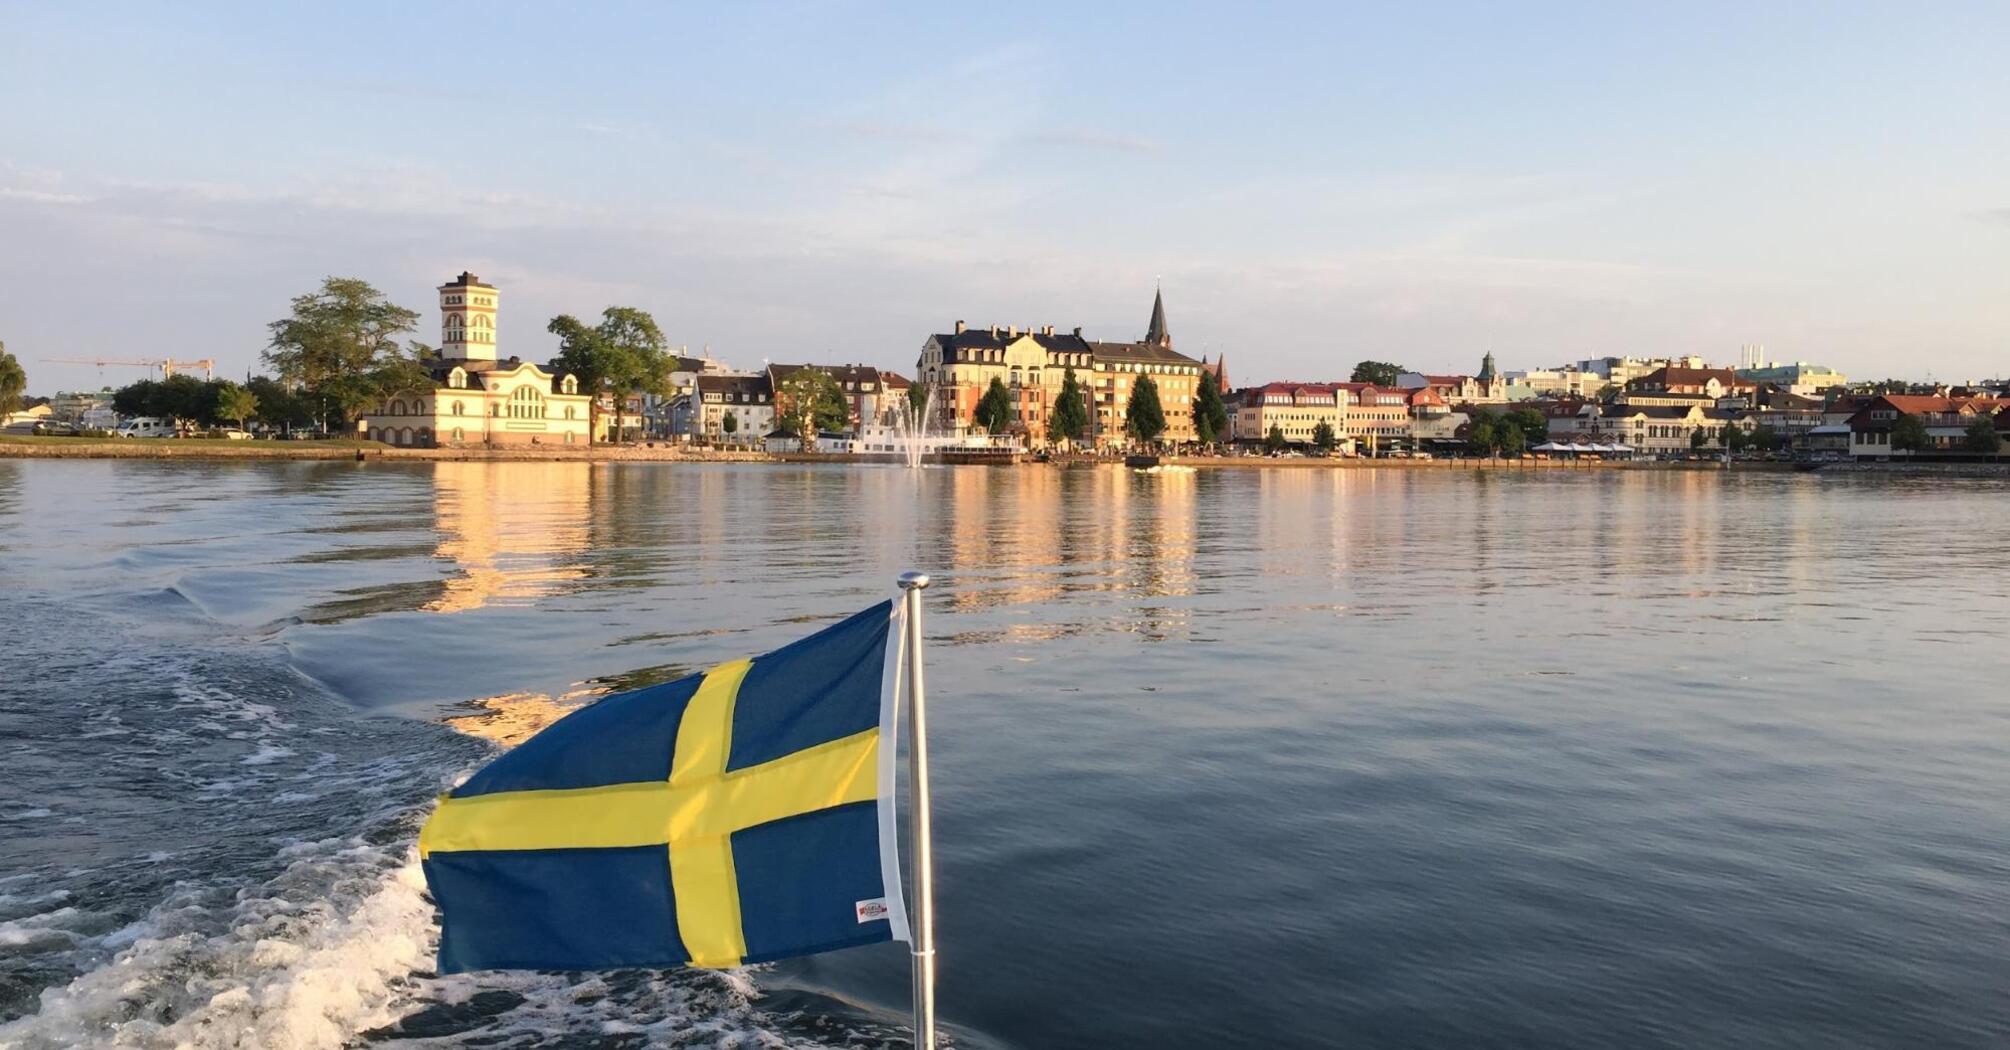 The calm waters of a Swedish lake reflect the charming architecture and the national flag